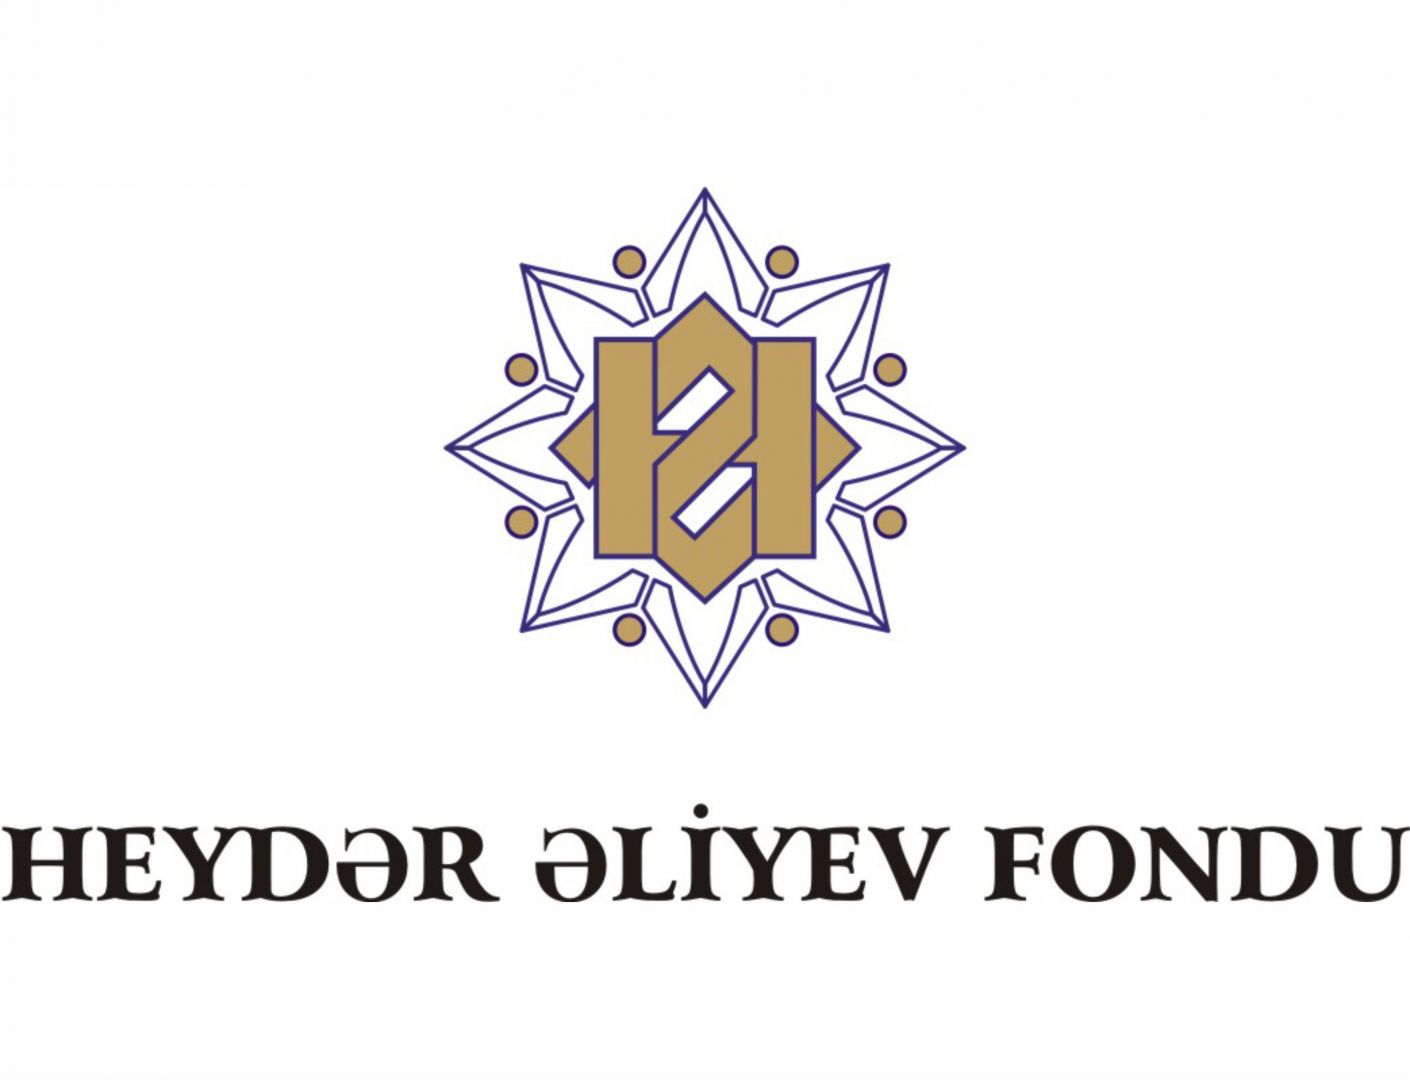 Heydar Aliyev Foundation provides financial assistance to families of Azerbaijanis died in earthquake in Turkiye